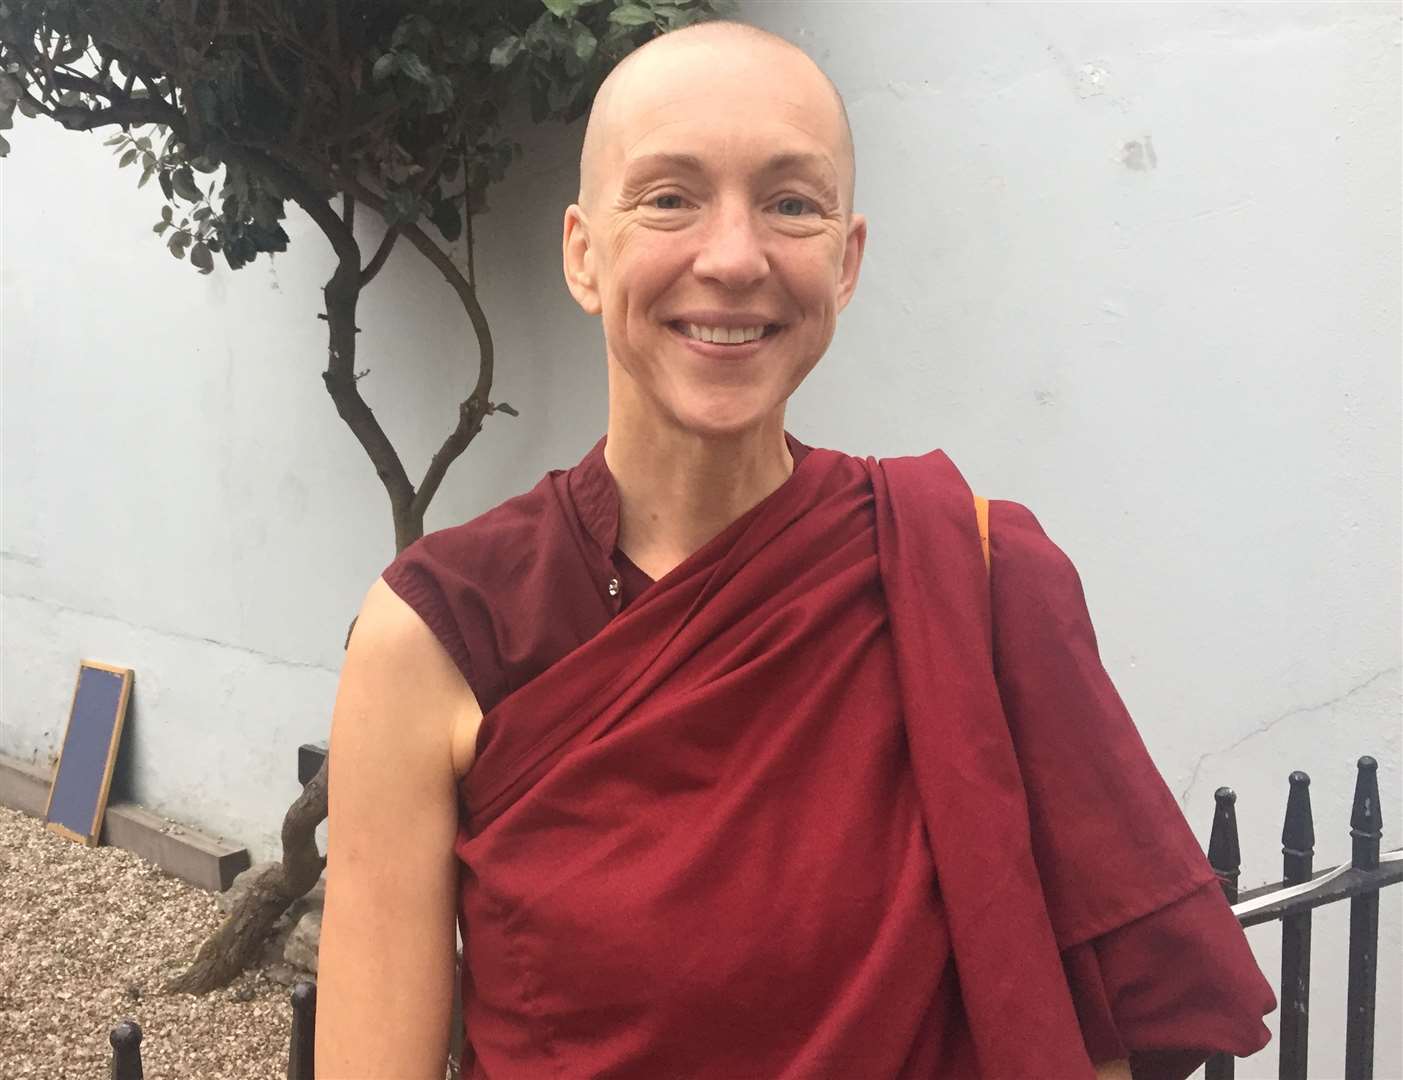 Emma Slade was a "high-flying" analyst before she turned to Buddhism